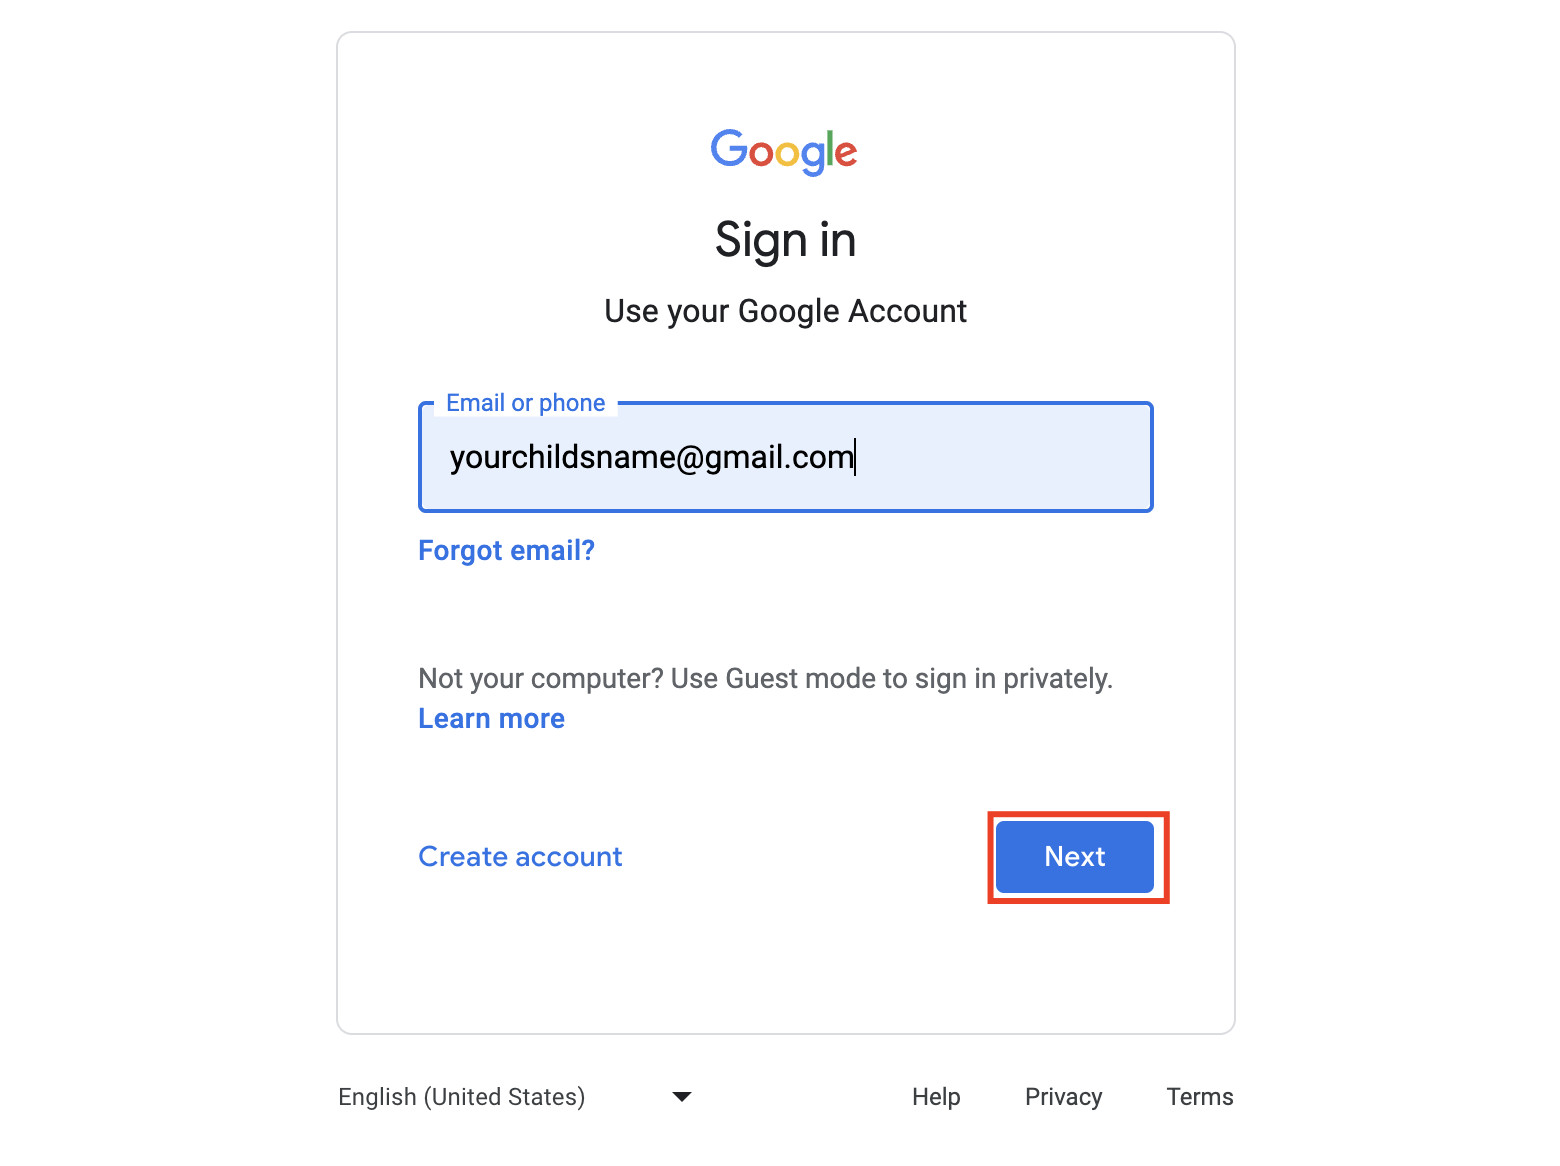 sign in with your Google account